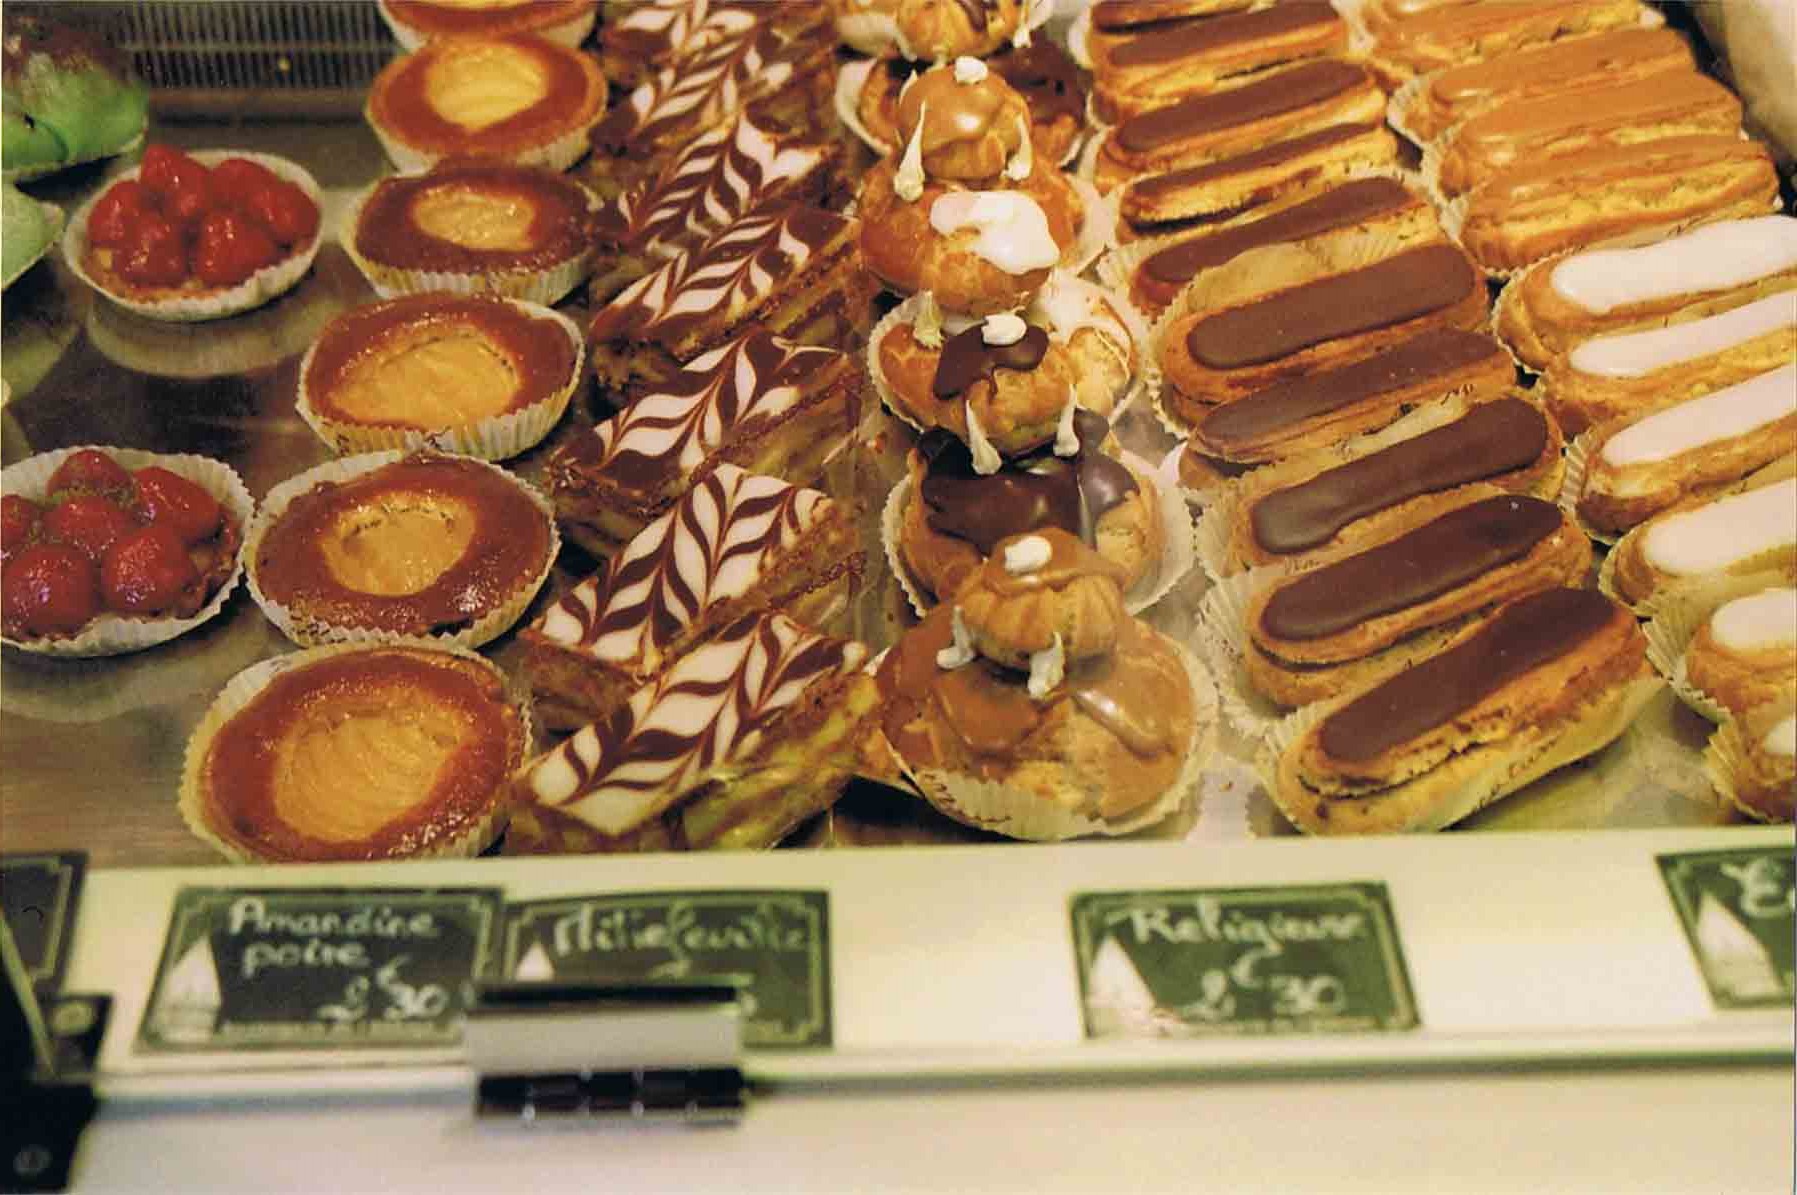 mille feulle Eclairs